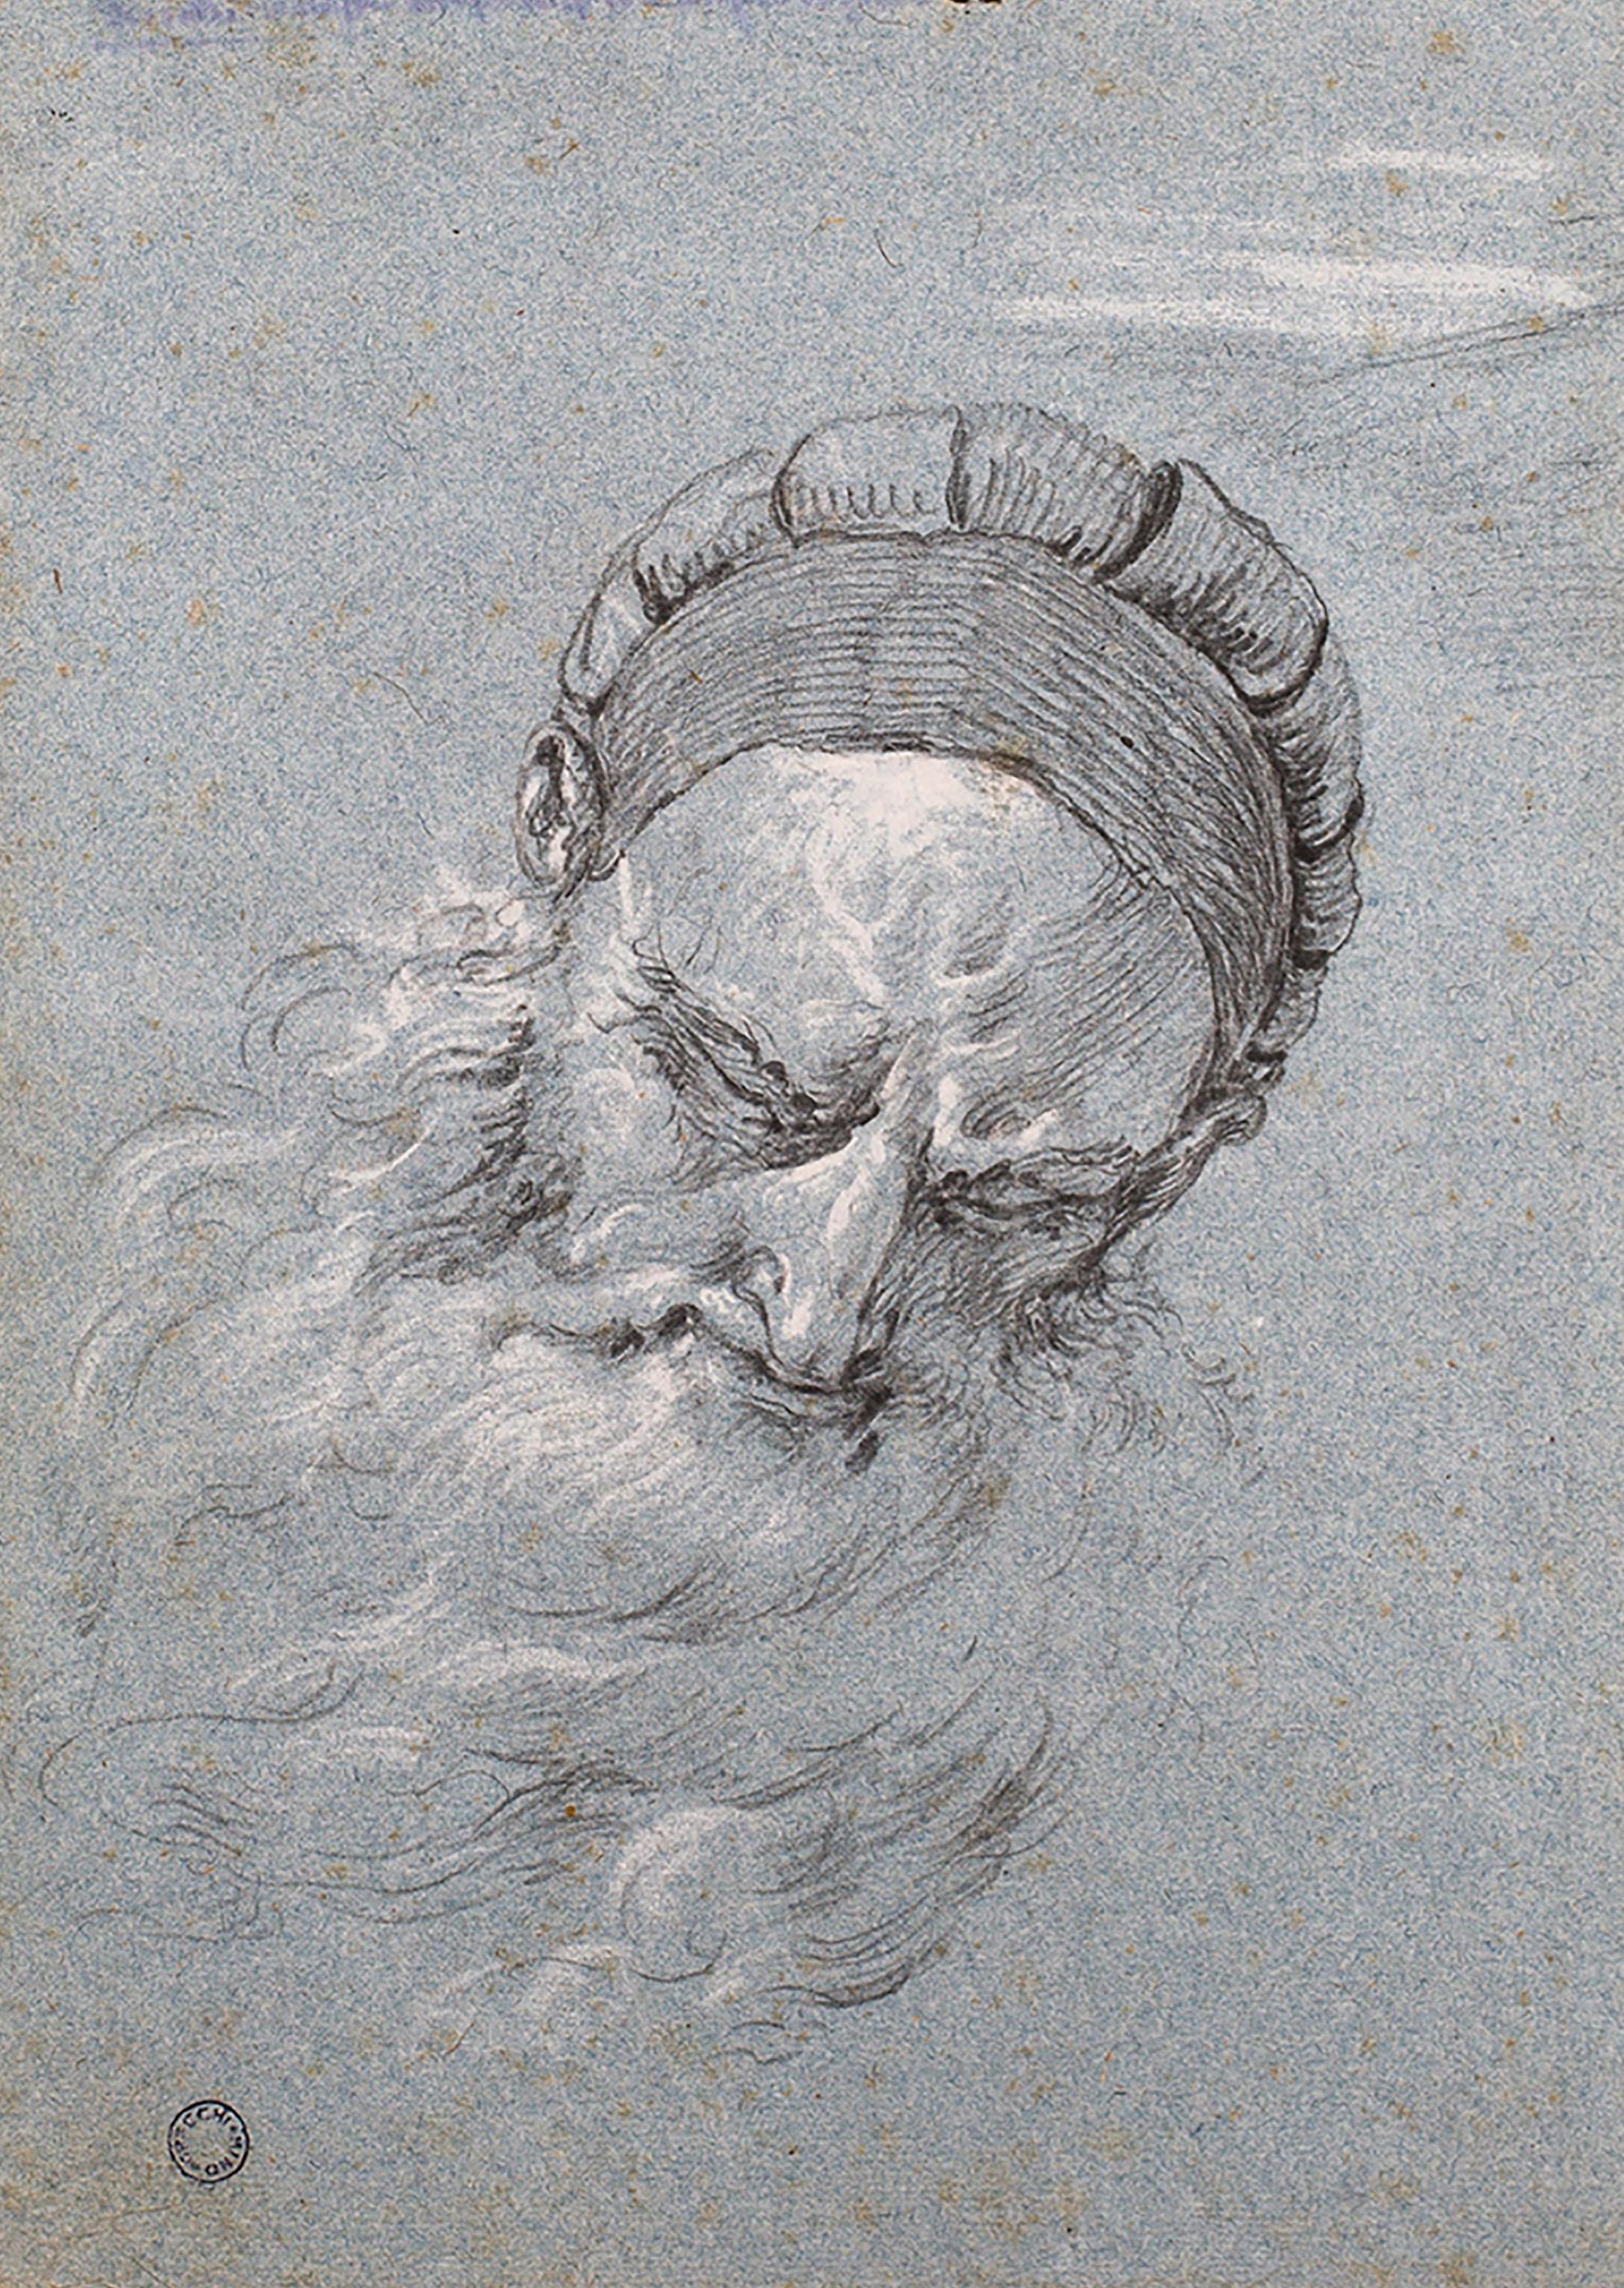 A fine chiaroscuro drawing of a Bearded Venetian Man gazing downward

Possibly by Giovanni Battista Piazzetta or his ambit
Early 18th century; Venice, Italy
Charcoal with white lead heightening on prepared blue paper
Approximate size: 29.5 x 22